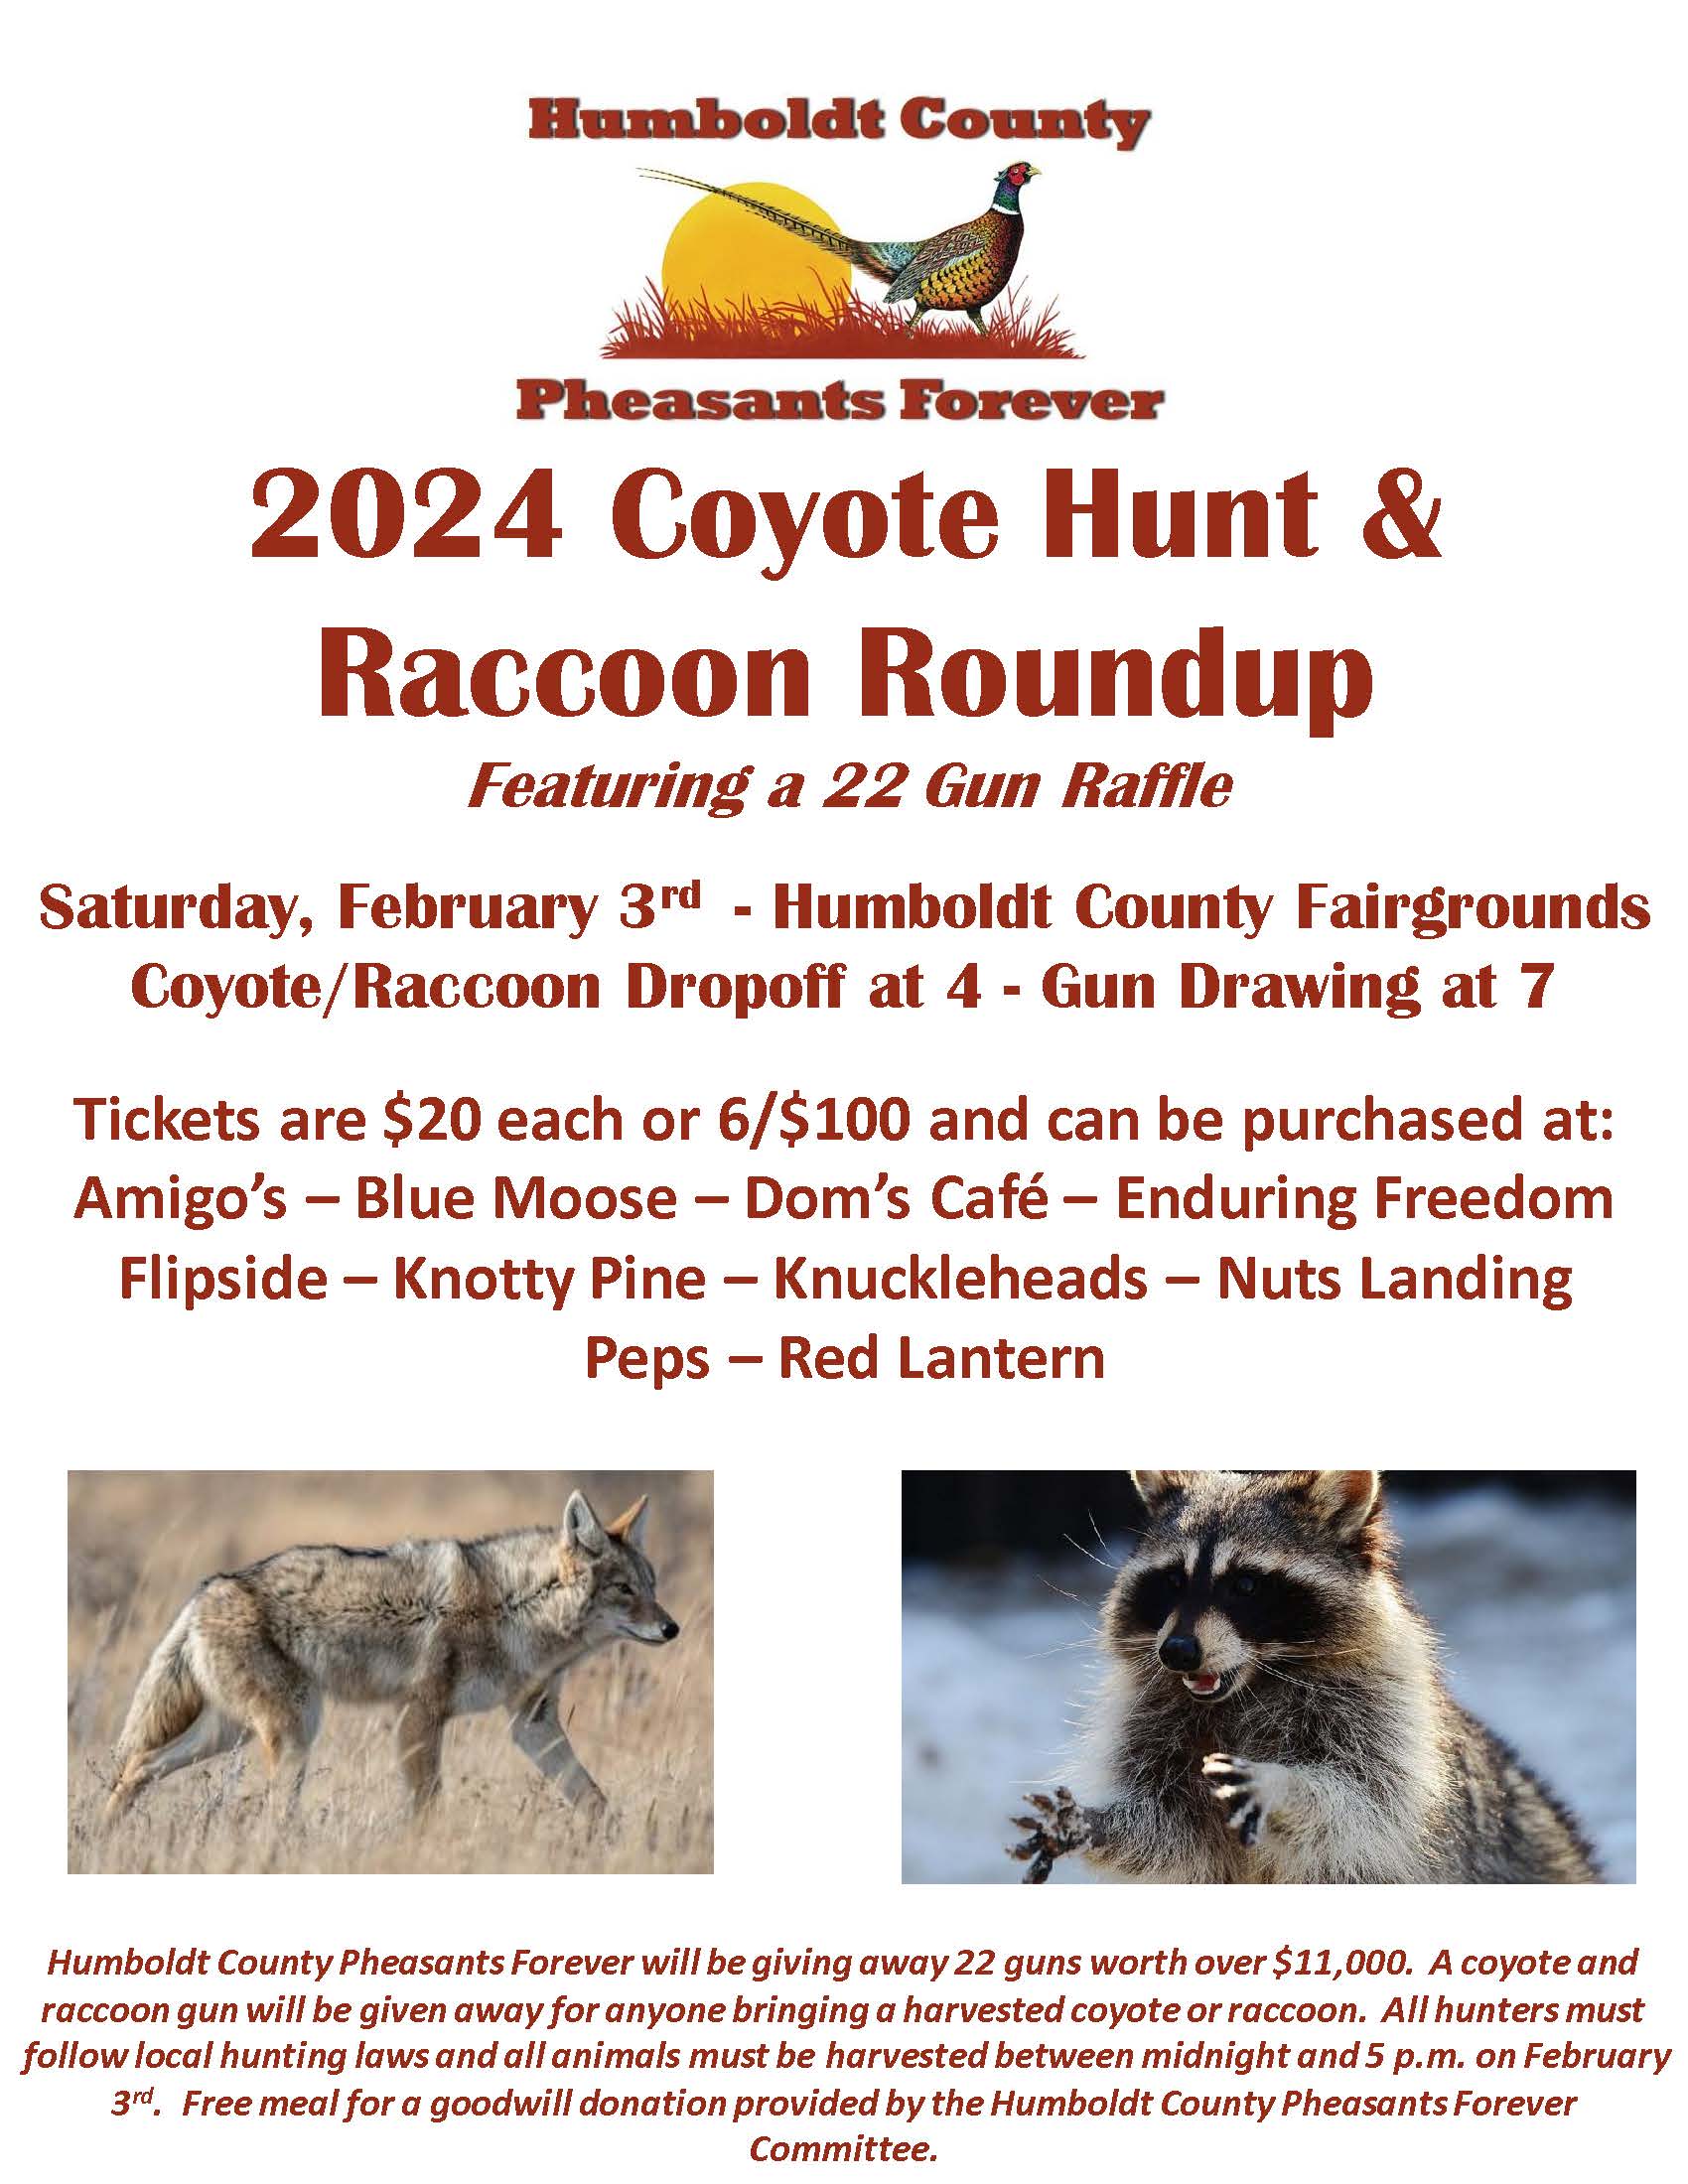 Humboldt County Pheasants Forever 2024 15th Annual Coyote Hunt & Raccoon Roundup